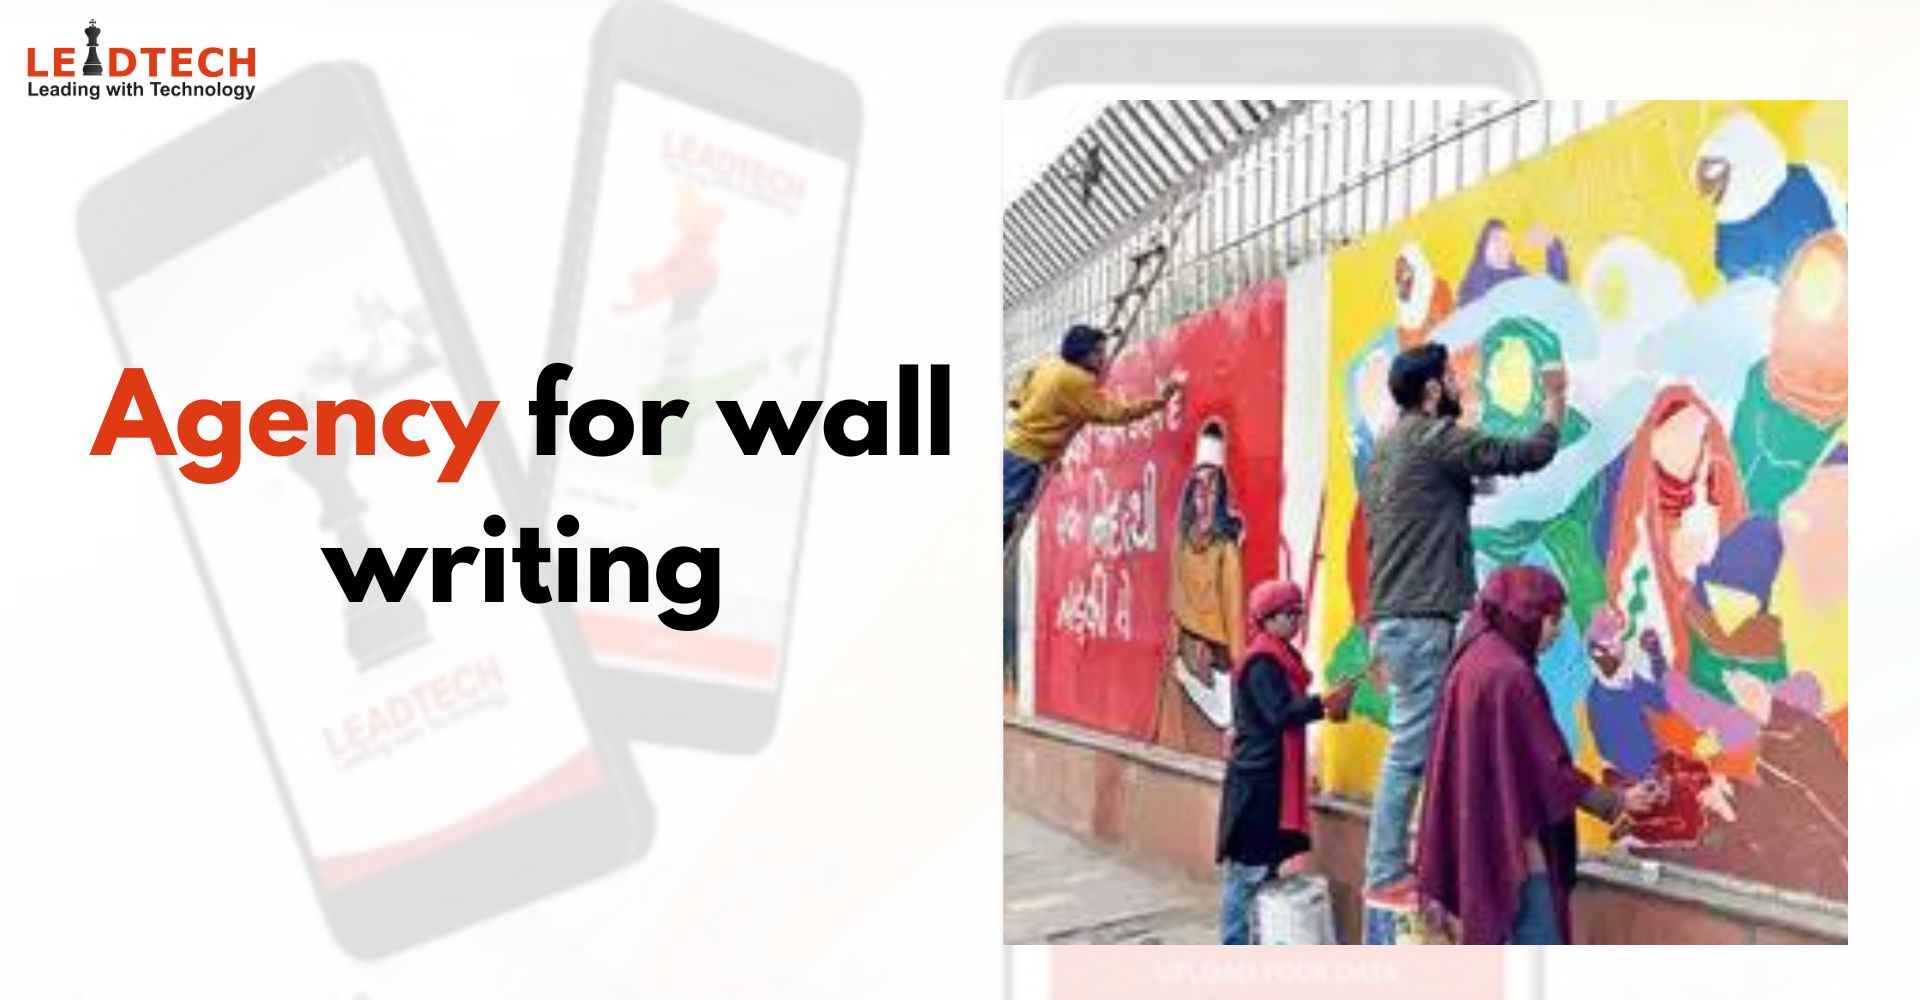 Agency for wall writing